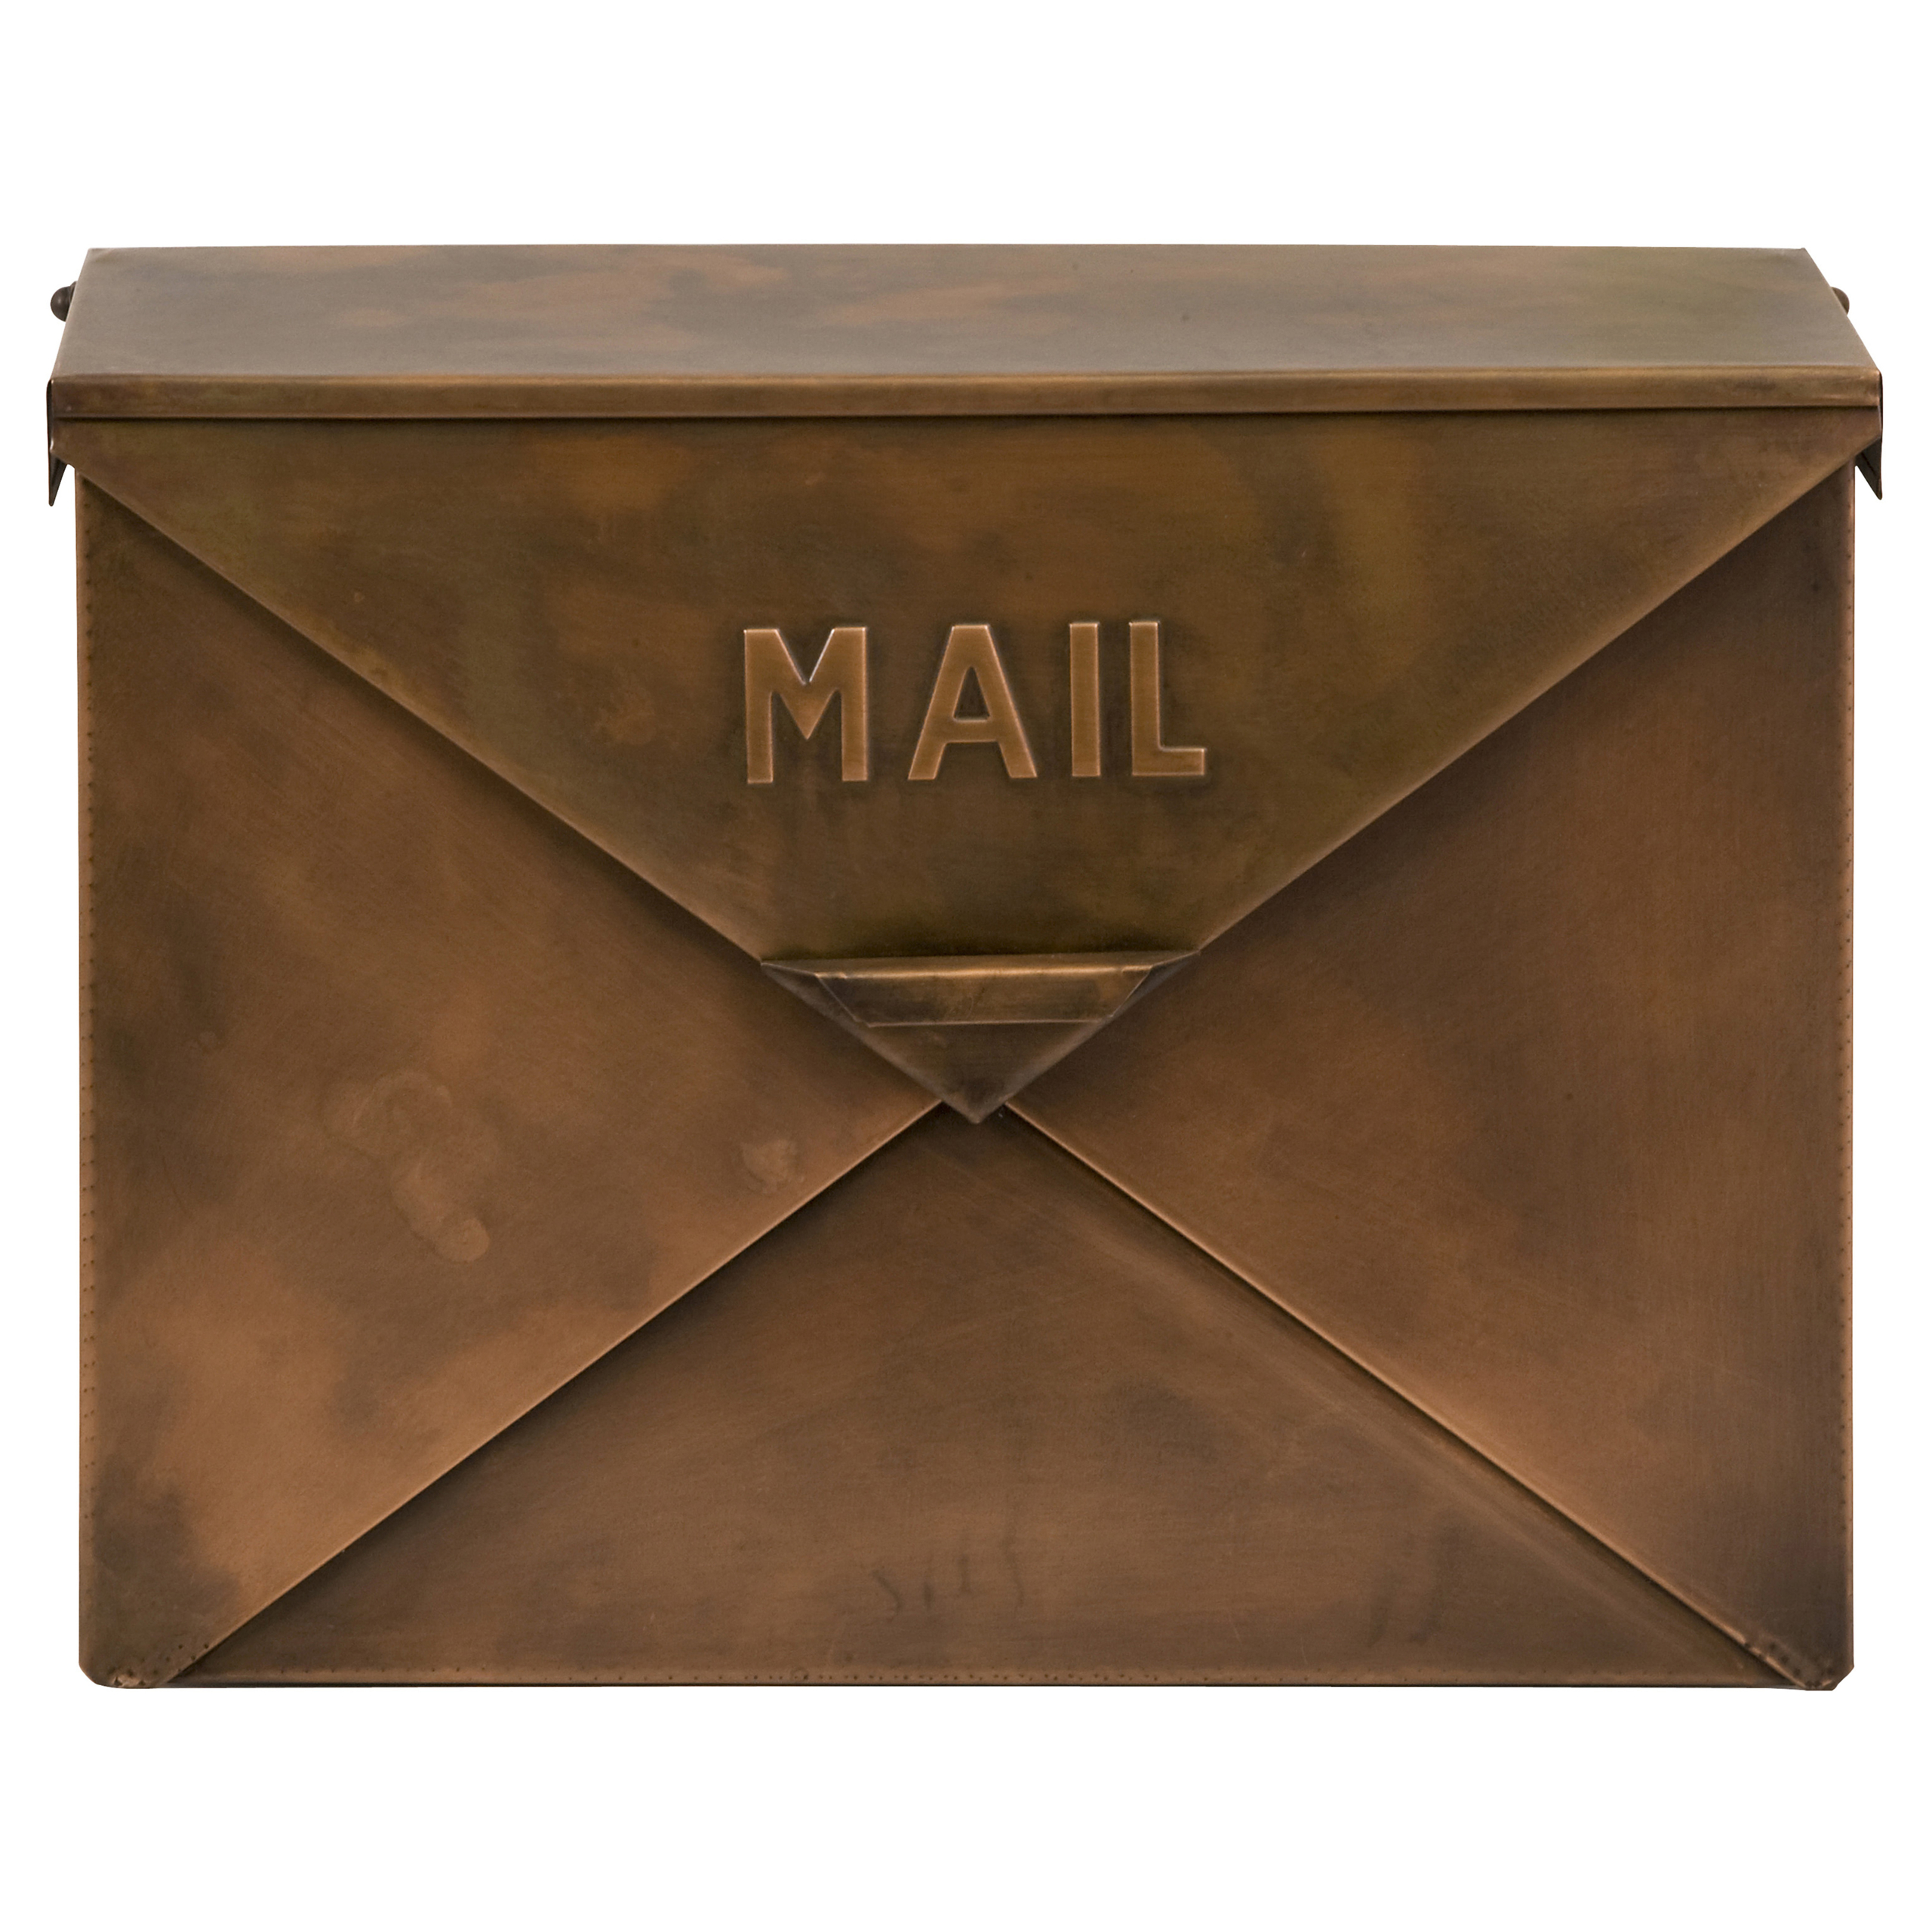 Vintage style copper envelope wall mount mailbox mail box